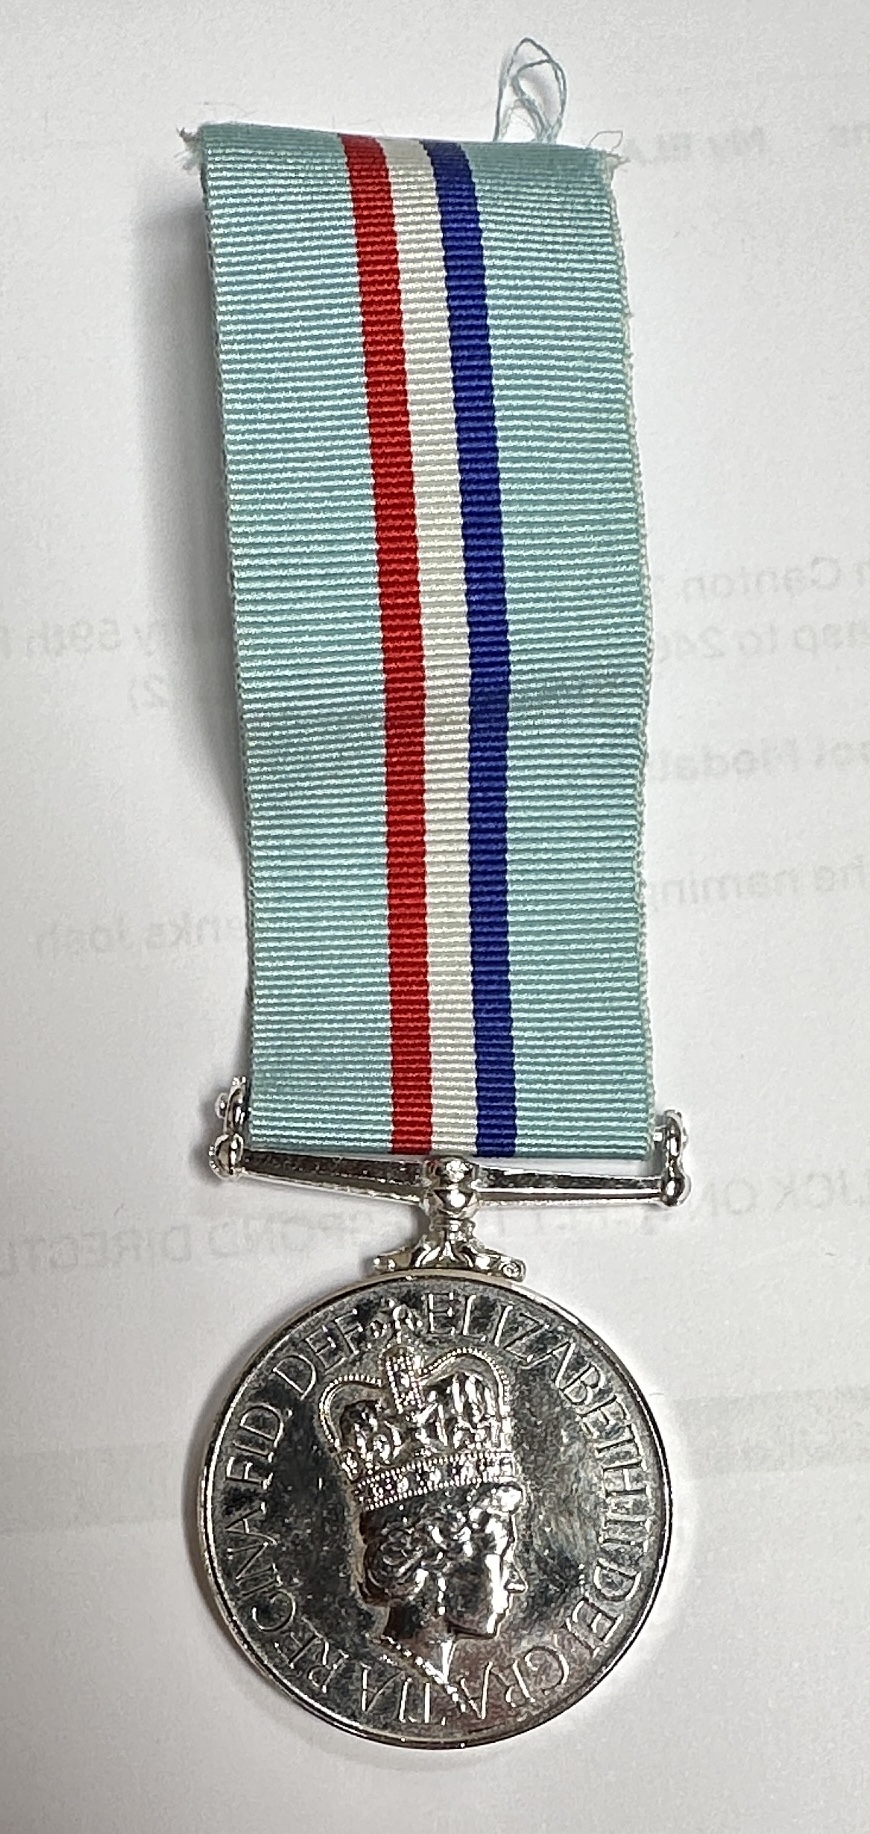 The Rhodesia Medal 1980 to '24442182 Sig S.J. Townsend. R. Signals,' together with The Zimbabwe - Bild 5 aus 8